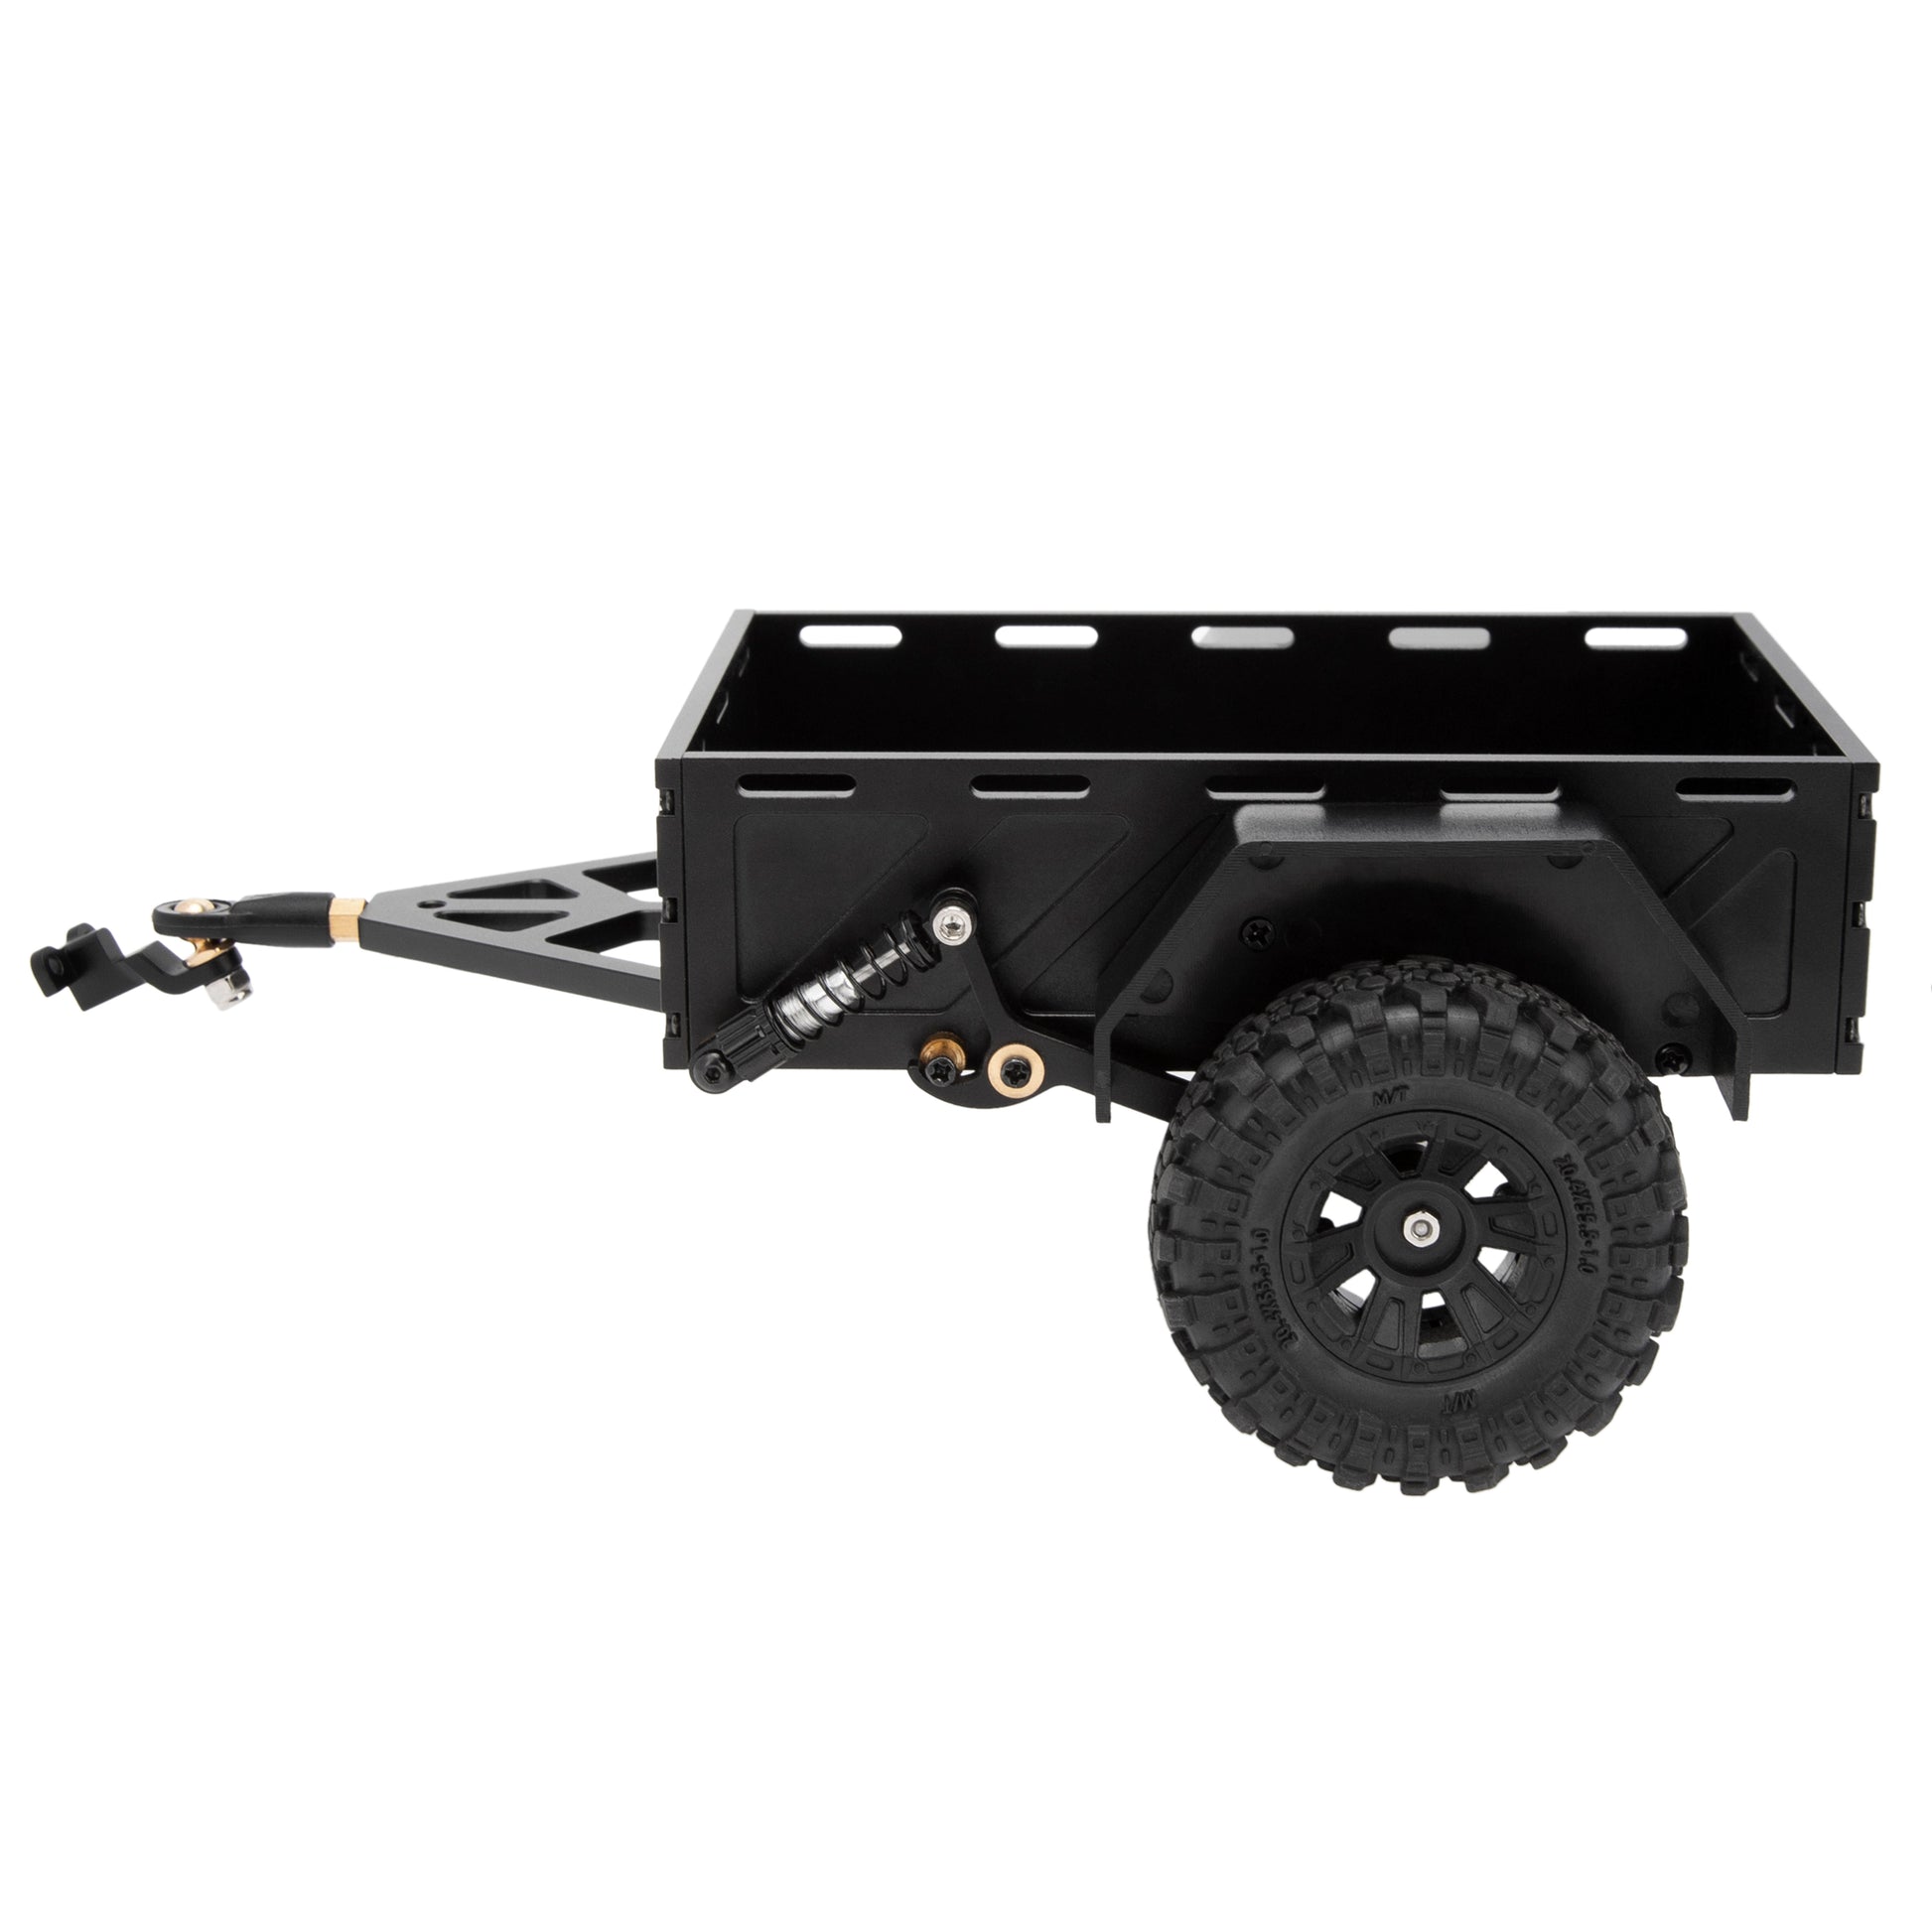 Black Utility trailer car with hitch for TRX4M